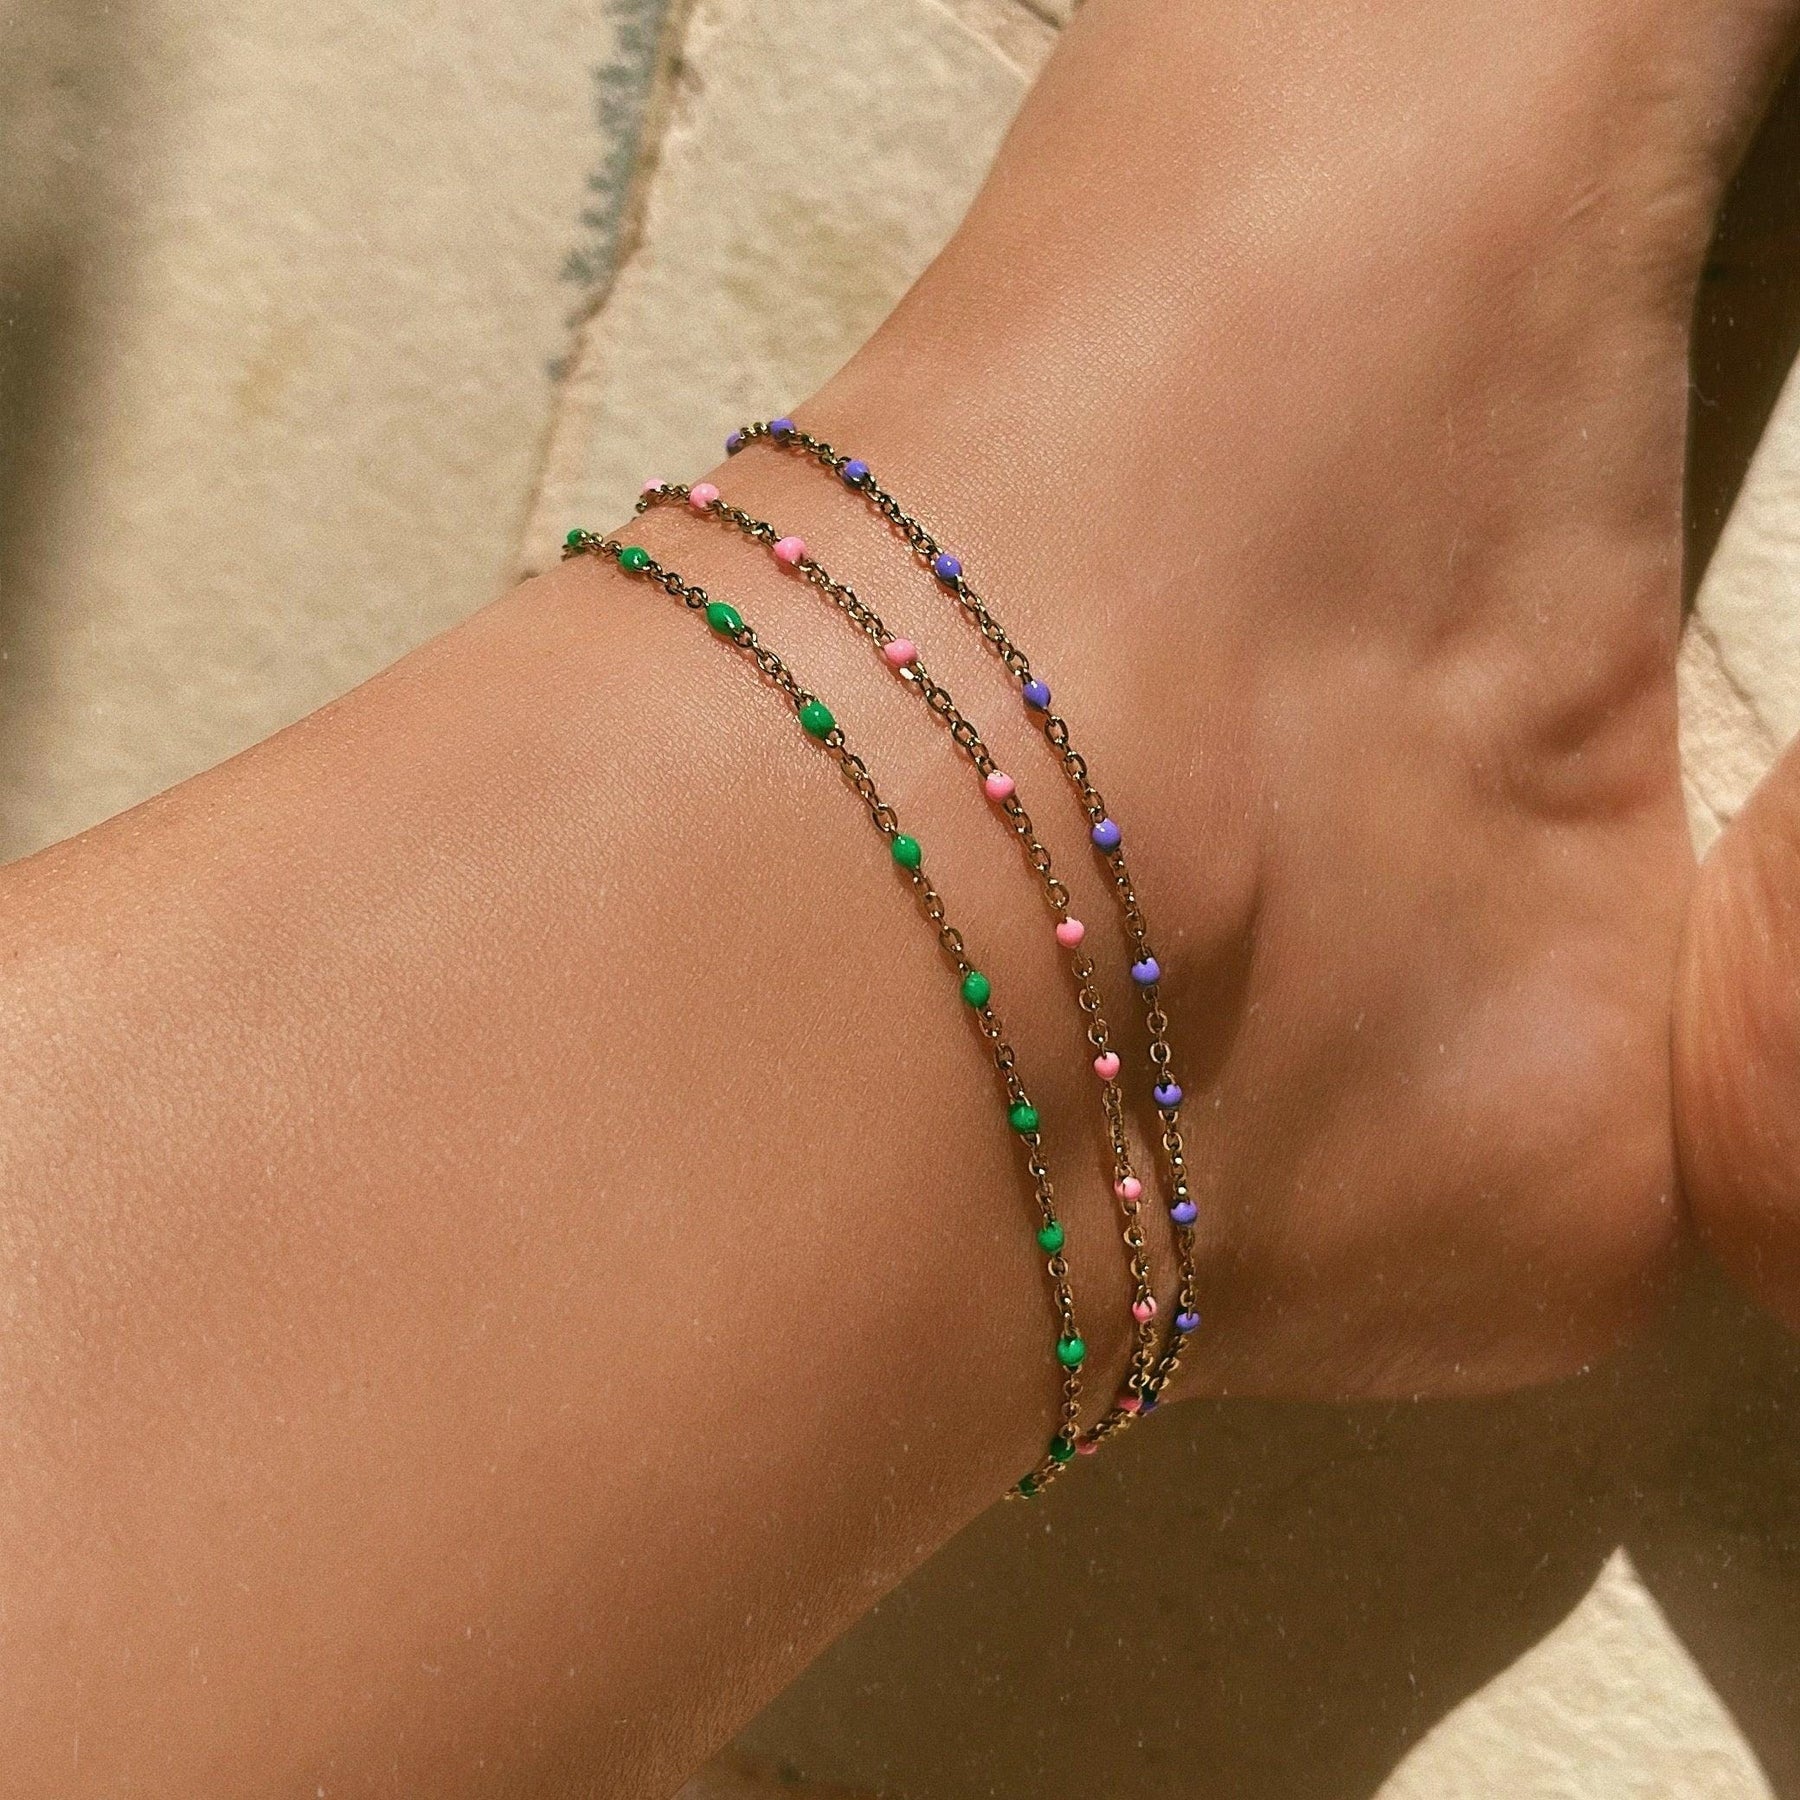 BohoMoon Stainless Steel Sorrento Anklet